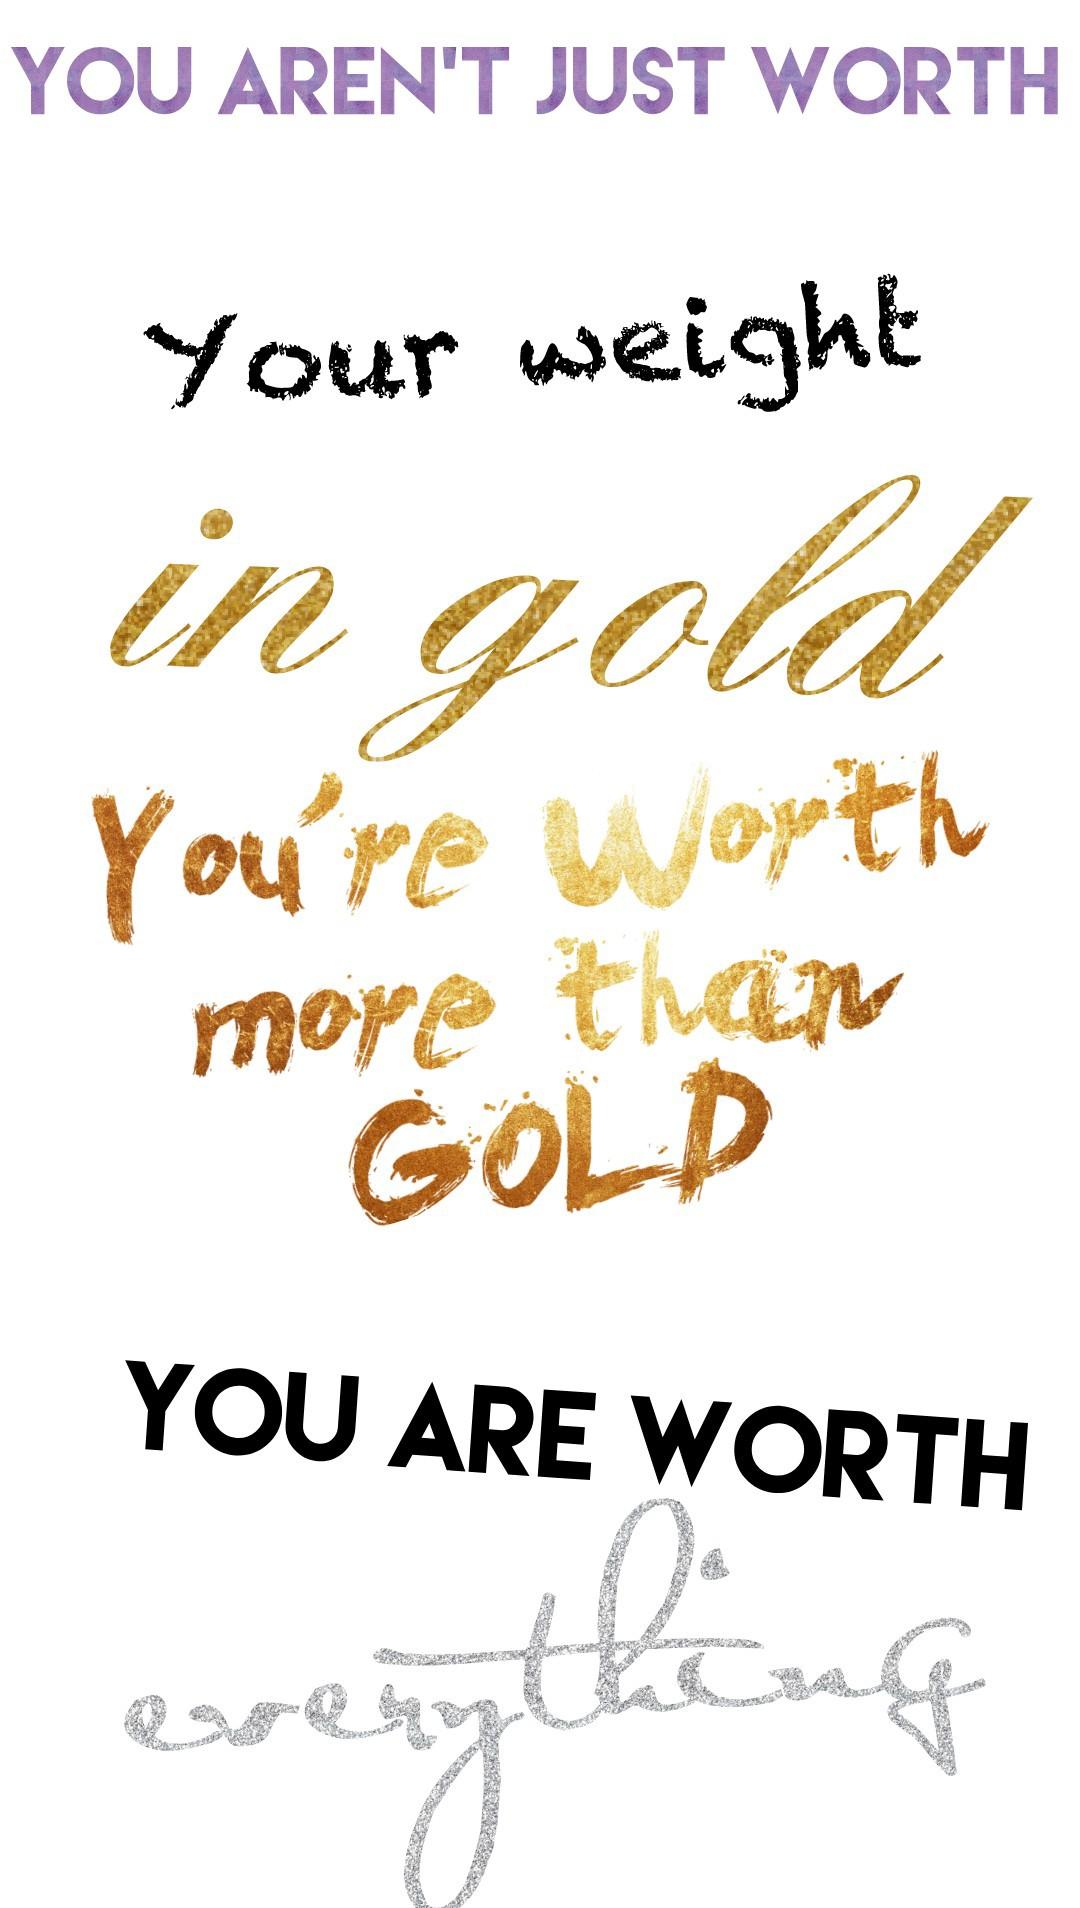 🌟tap🌟
You are worth the whole world! This is super cringy but idc. Their haven't been many posts on here and I wanted to post something new. A lot of people are depressed and it's sad, you are all beautiful! -Carley